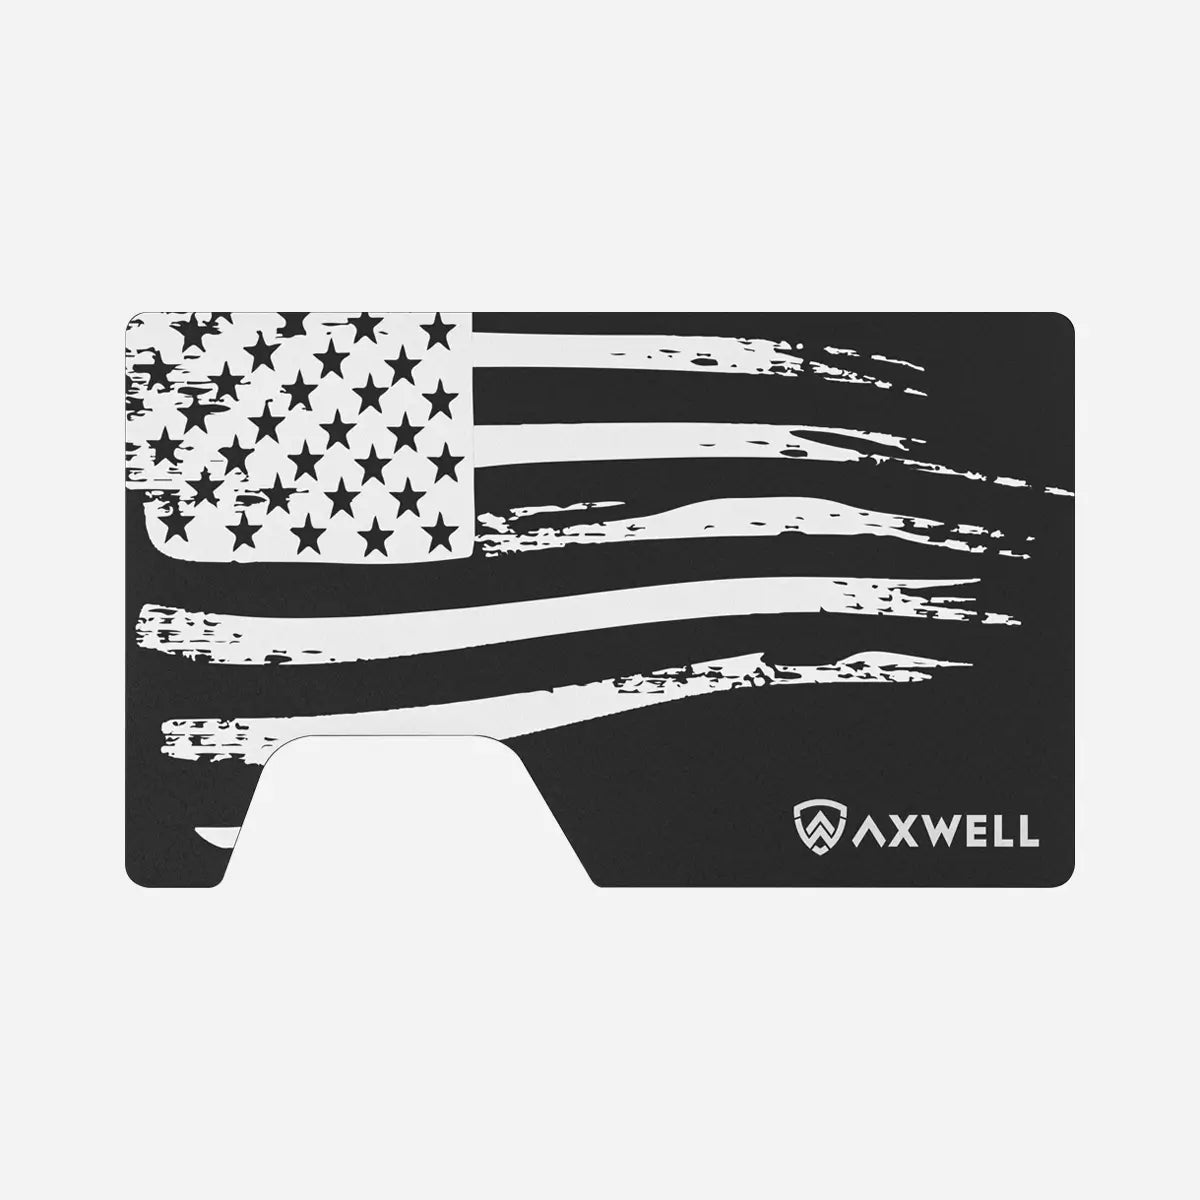 Axwell Wallet SE Cover Plates - Patriot Black